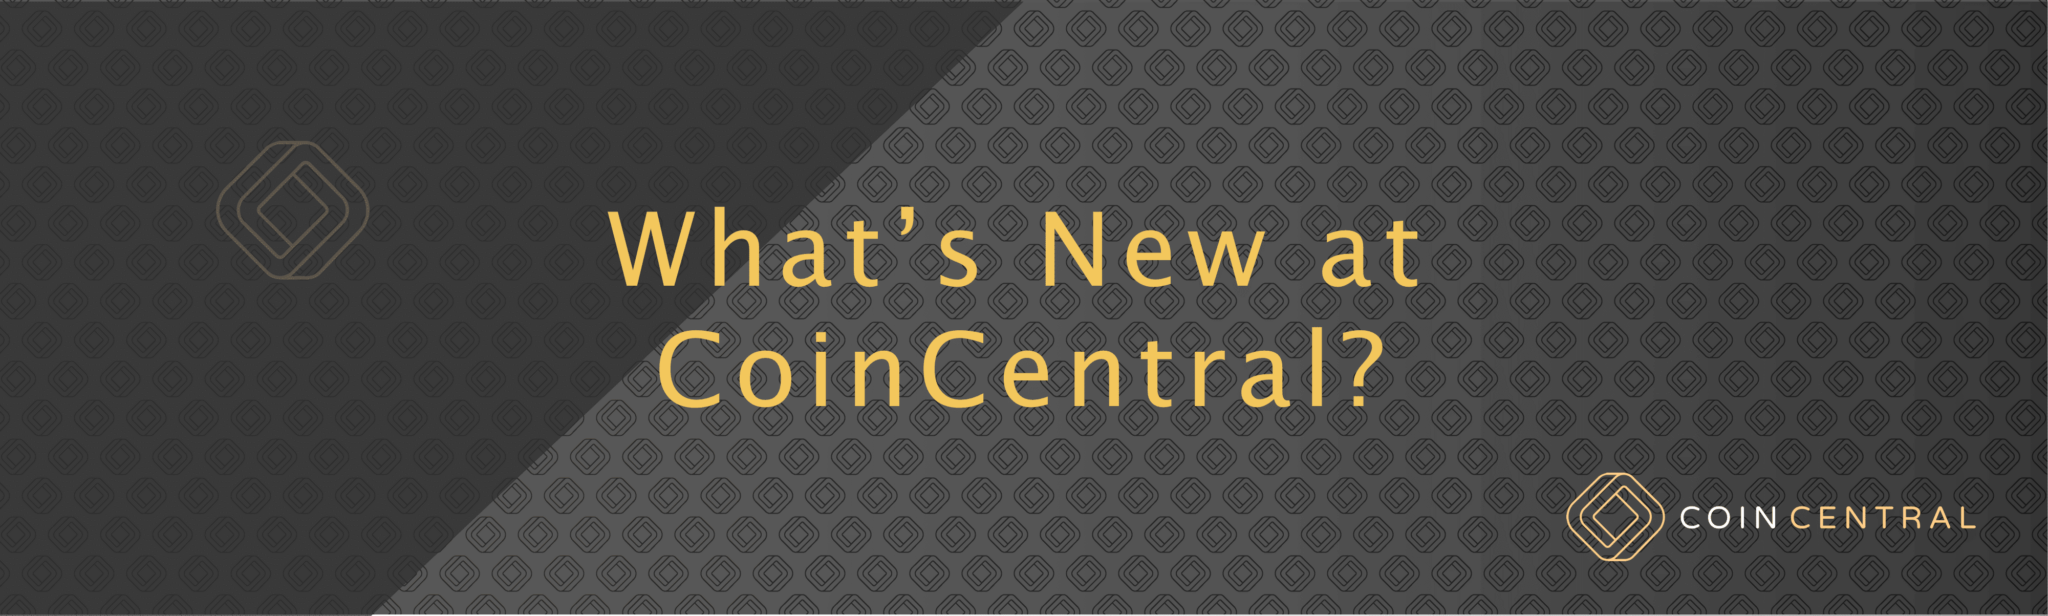   what's new coincidentally "width =" 4001 "height =" 1203 "srcset =" https: // coincentral.com/wp-content/uploads/2018/08/whats-new-at-coincentral.png 4001w, https://coincentral.com/wp-content/uploads/2018/08/whats-new-at-coincentral -300x90.png 300w, https://coincentral.com/wp-content/uploads/2018/08 /whats-new-at-coincentral-768x231.png 768w, https://coincentral.com/wp-content/uploads /2018/08/whats-new-at-coincentral-874x263.png 874w, https: // coincentral .com / wp-content / uploads / 2018/08 / whats-new-at-coincentral-600x180.png 600w "size =" (maximum width: 4001 px) 100vw, 4001 px 